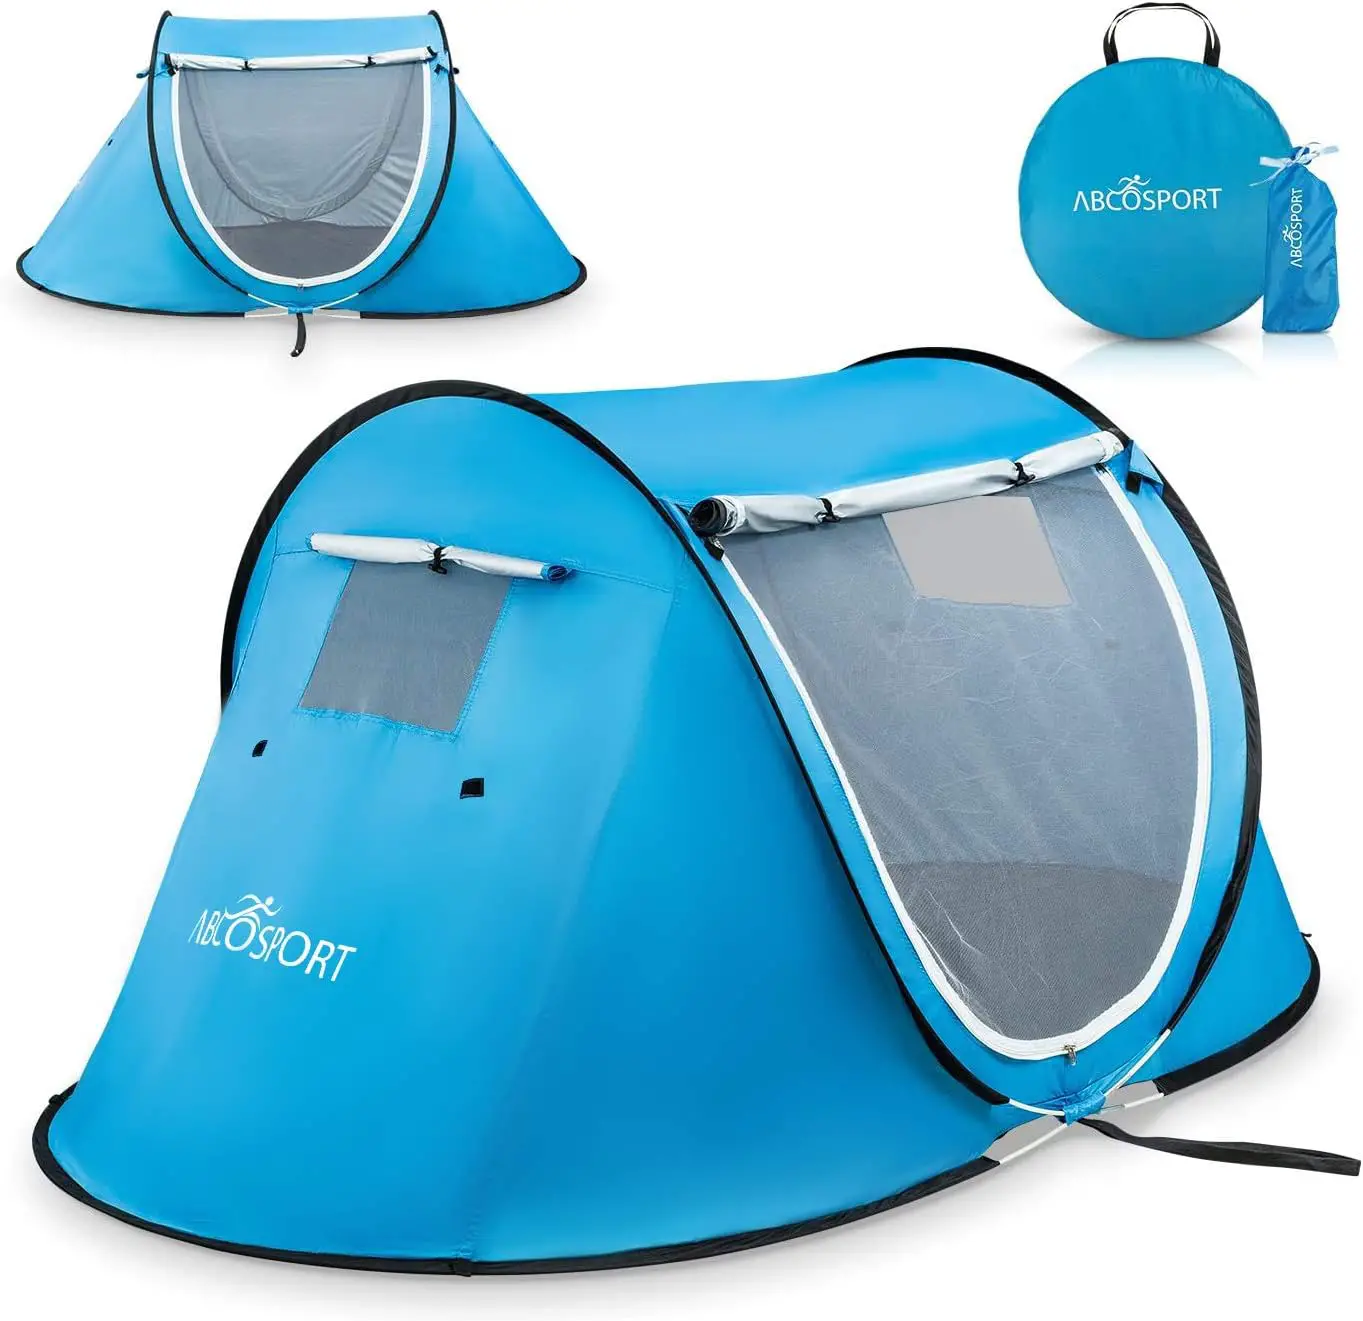 Abco Small Pop Up Tent Review